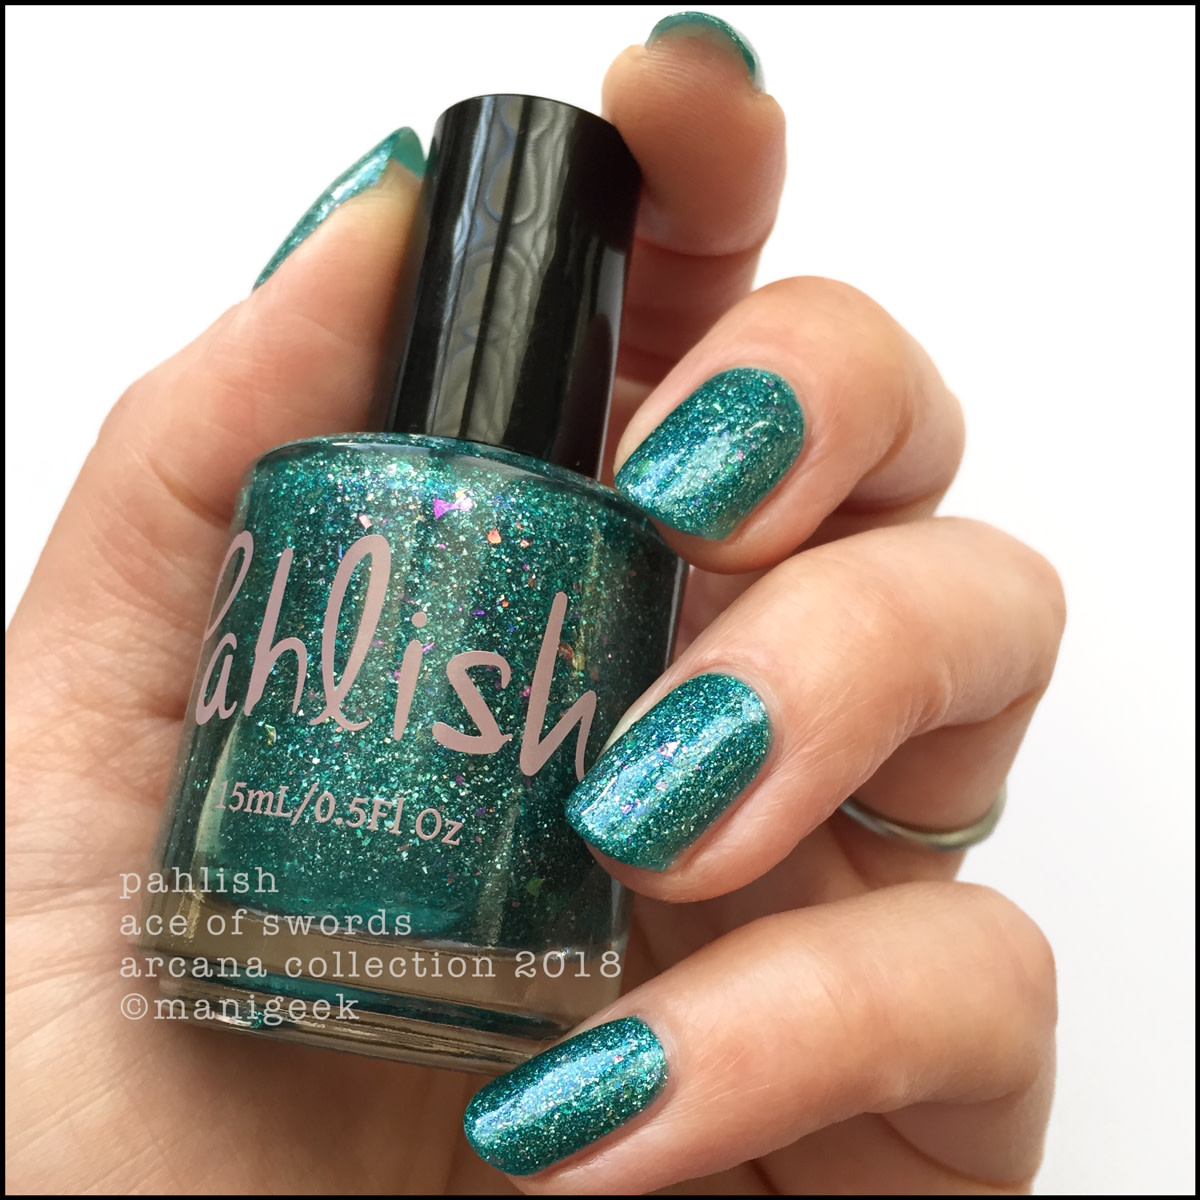 Pahlish Ace of Swords - Pahlish Arcana Collection Swatches Review 2018